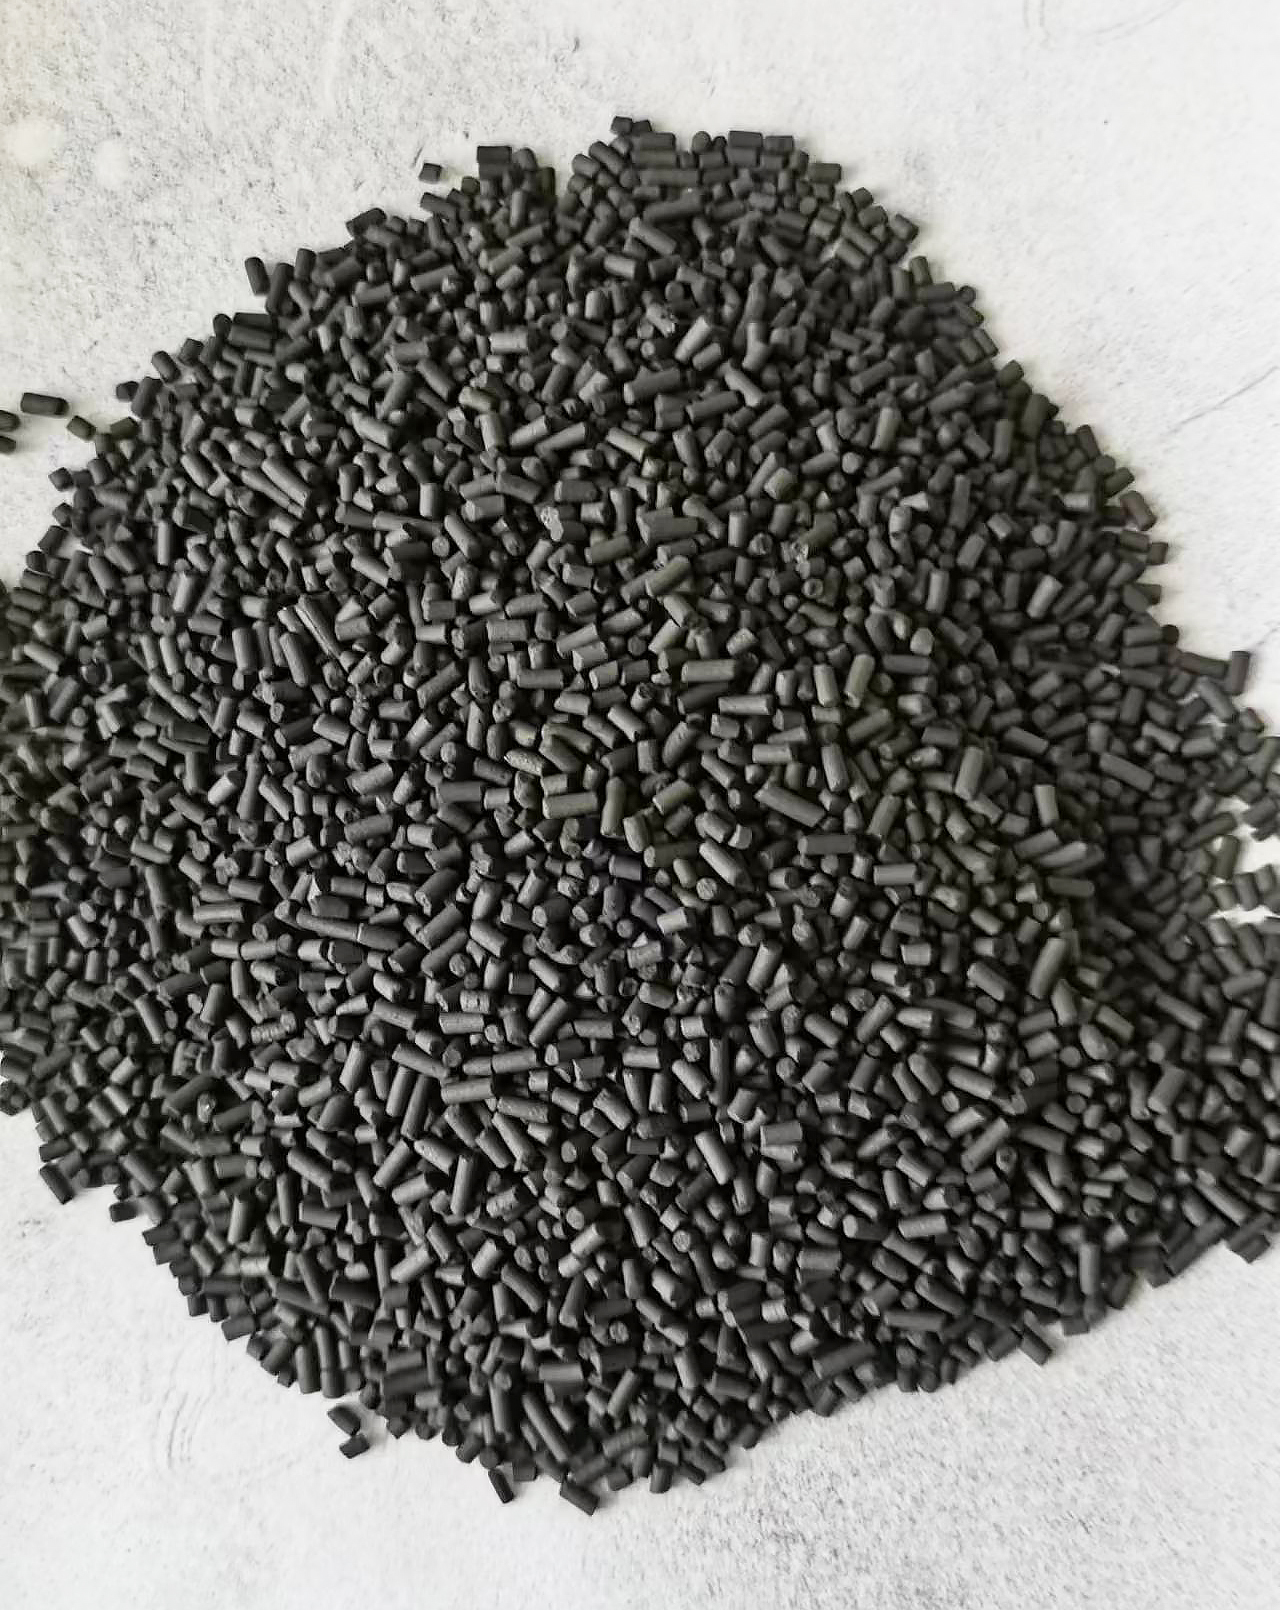 How to identify the quality of activated carbon products?